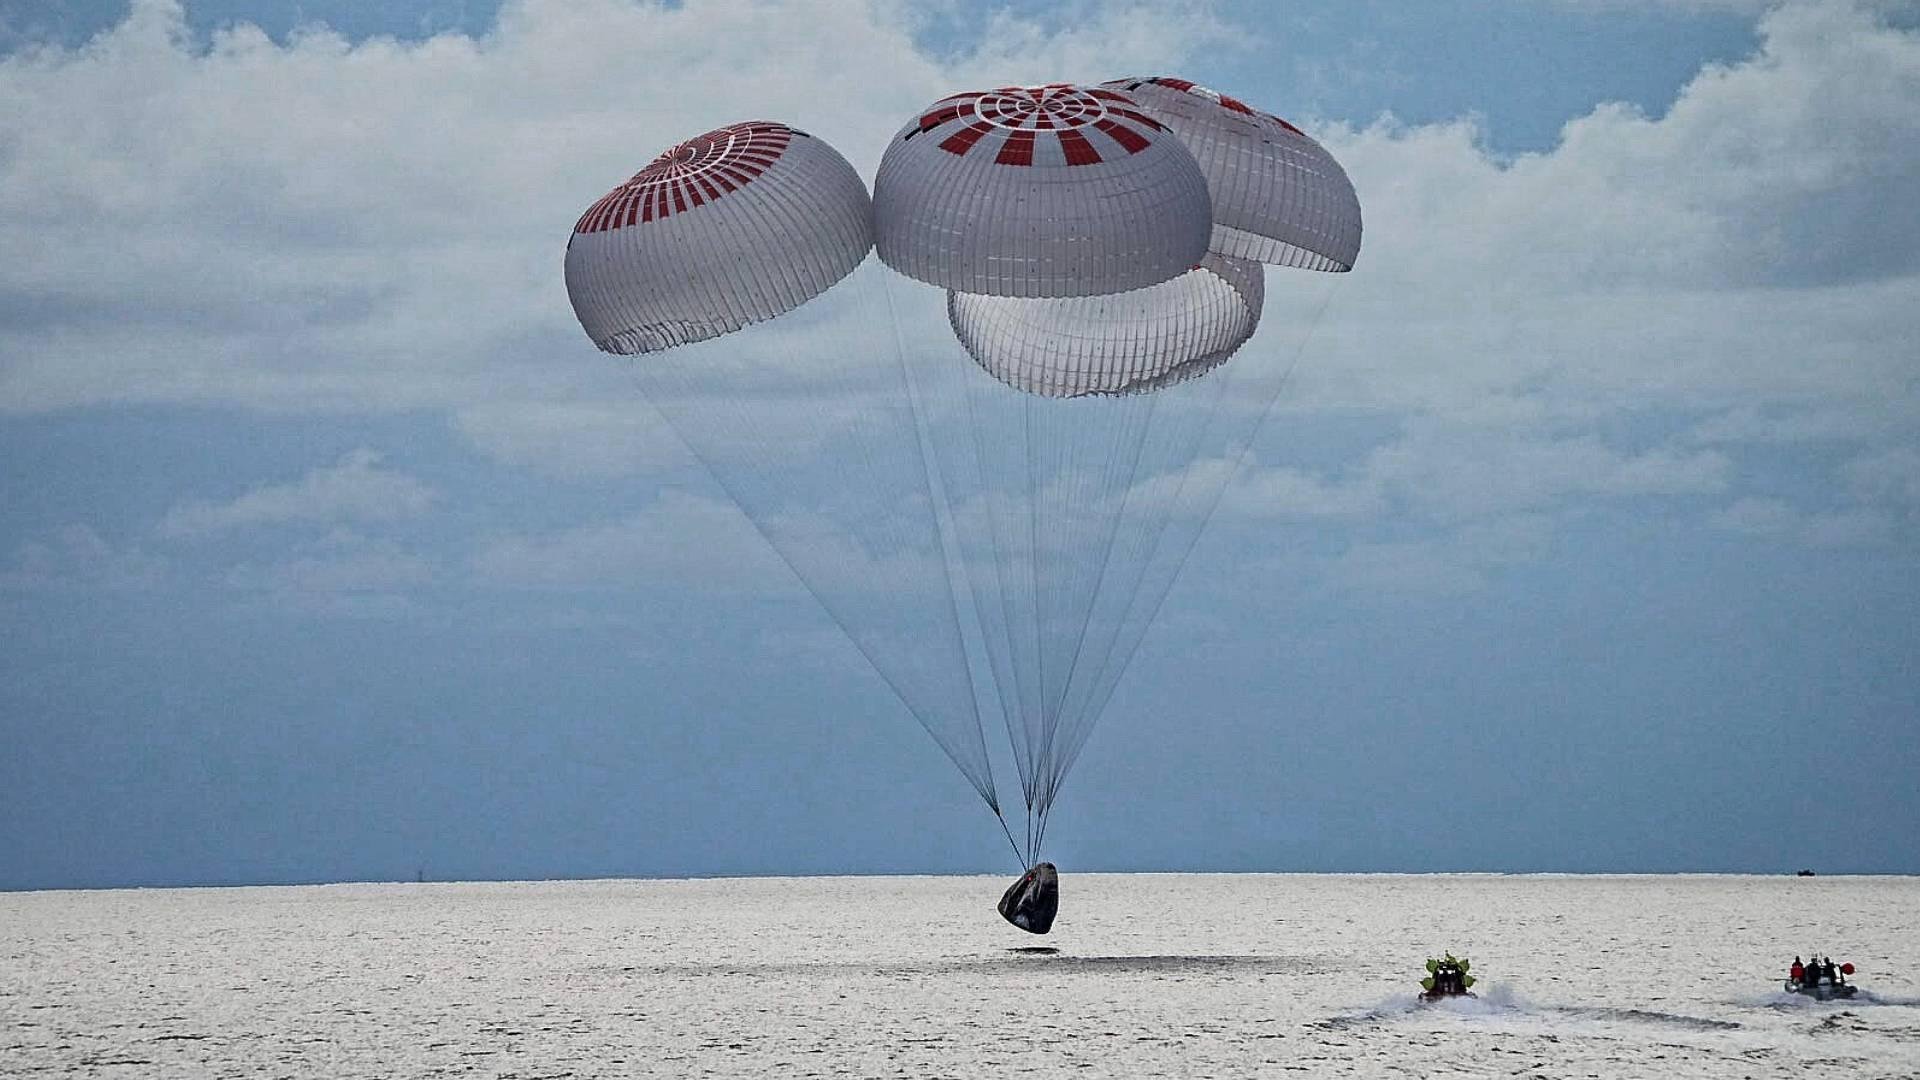 SpaceX civilian crew successfully returned to Earth